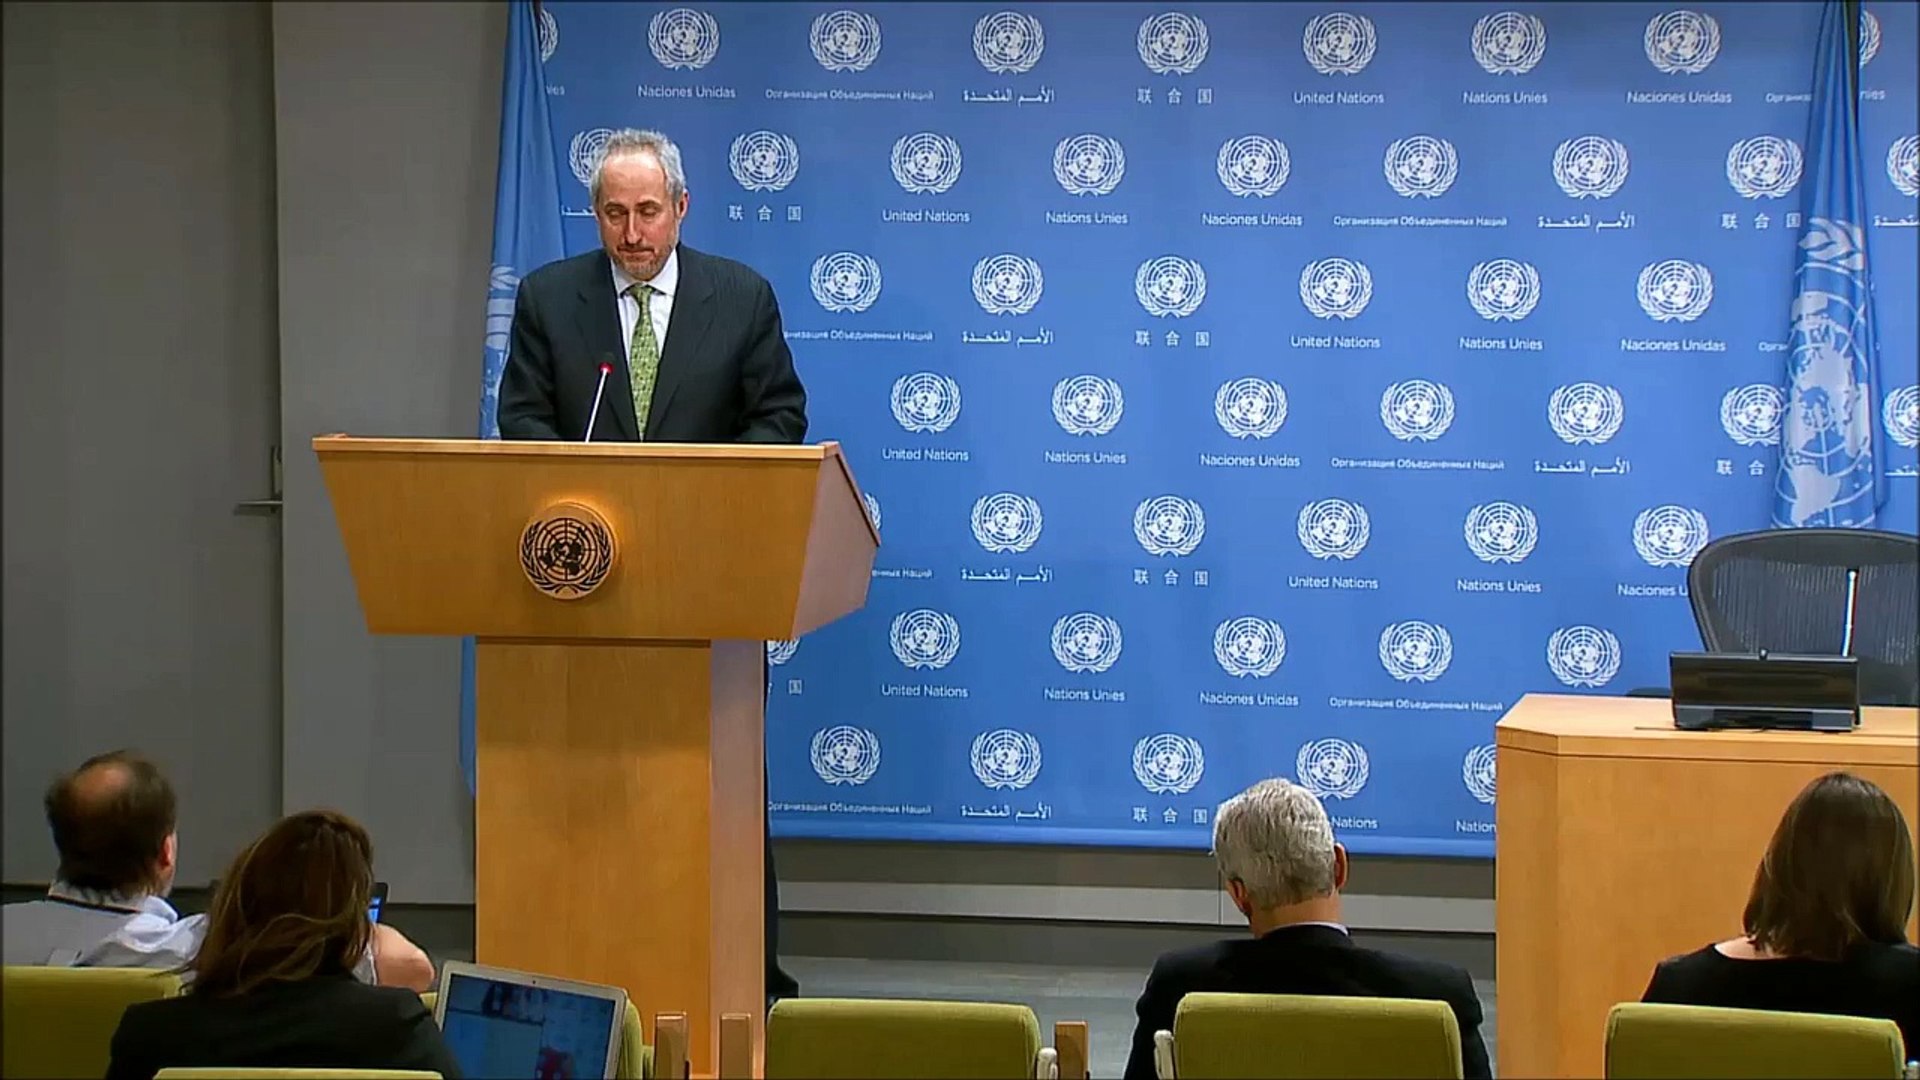 ICP Asks How Indicted Lorenzo Was Lent UN Press Room, Spox Dujarric Says “Im Done Answe